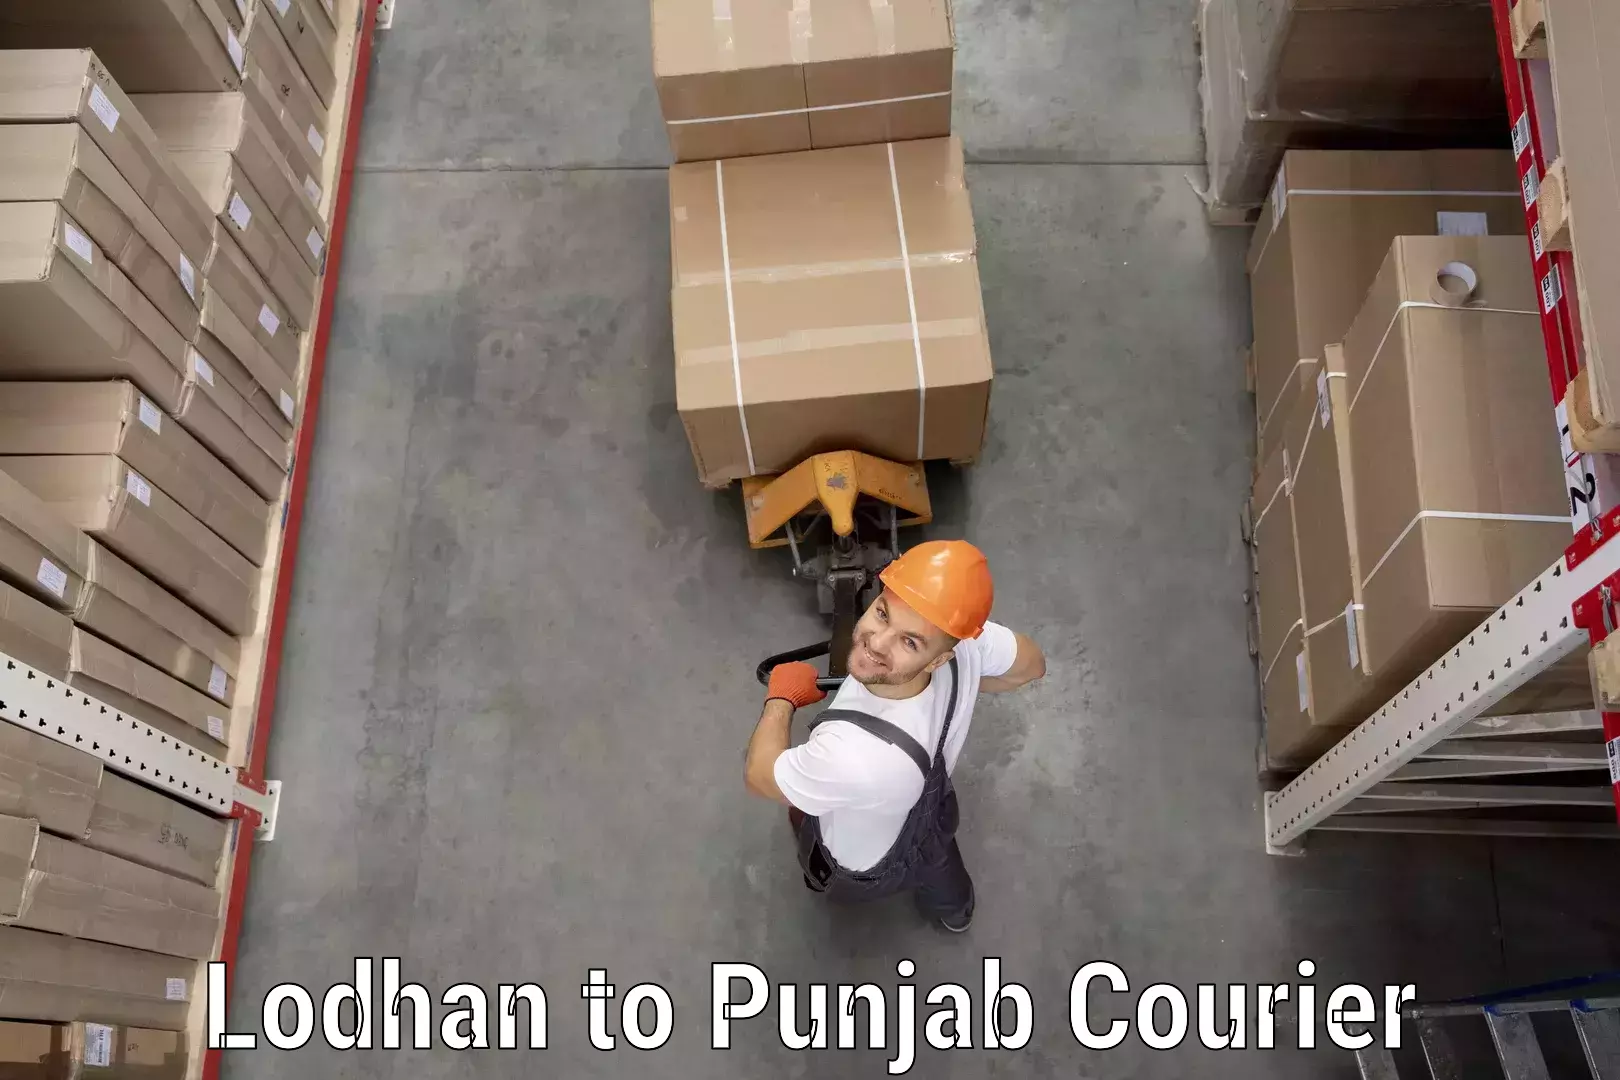 Efficient courier operations Lodhan to Punjab